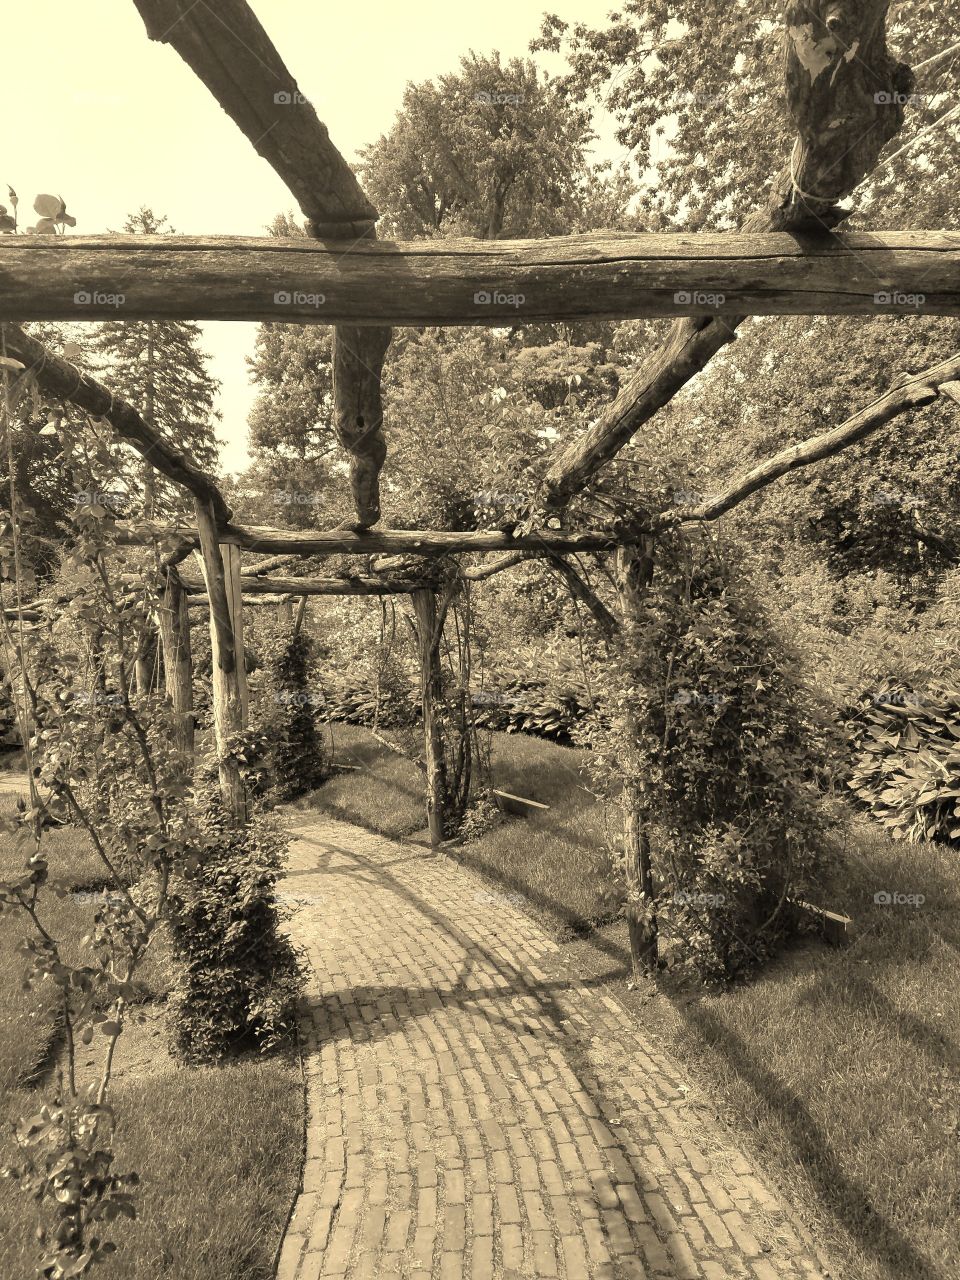 Beginning of Summer at Old Westbury Gardens on Long Island. Mix of Clouds and Sun. Sepia Filter. Walking Path  Captured on Android Phone - Galaxy S7. May 2017.